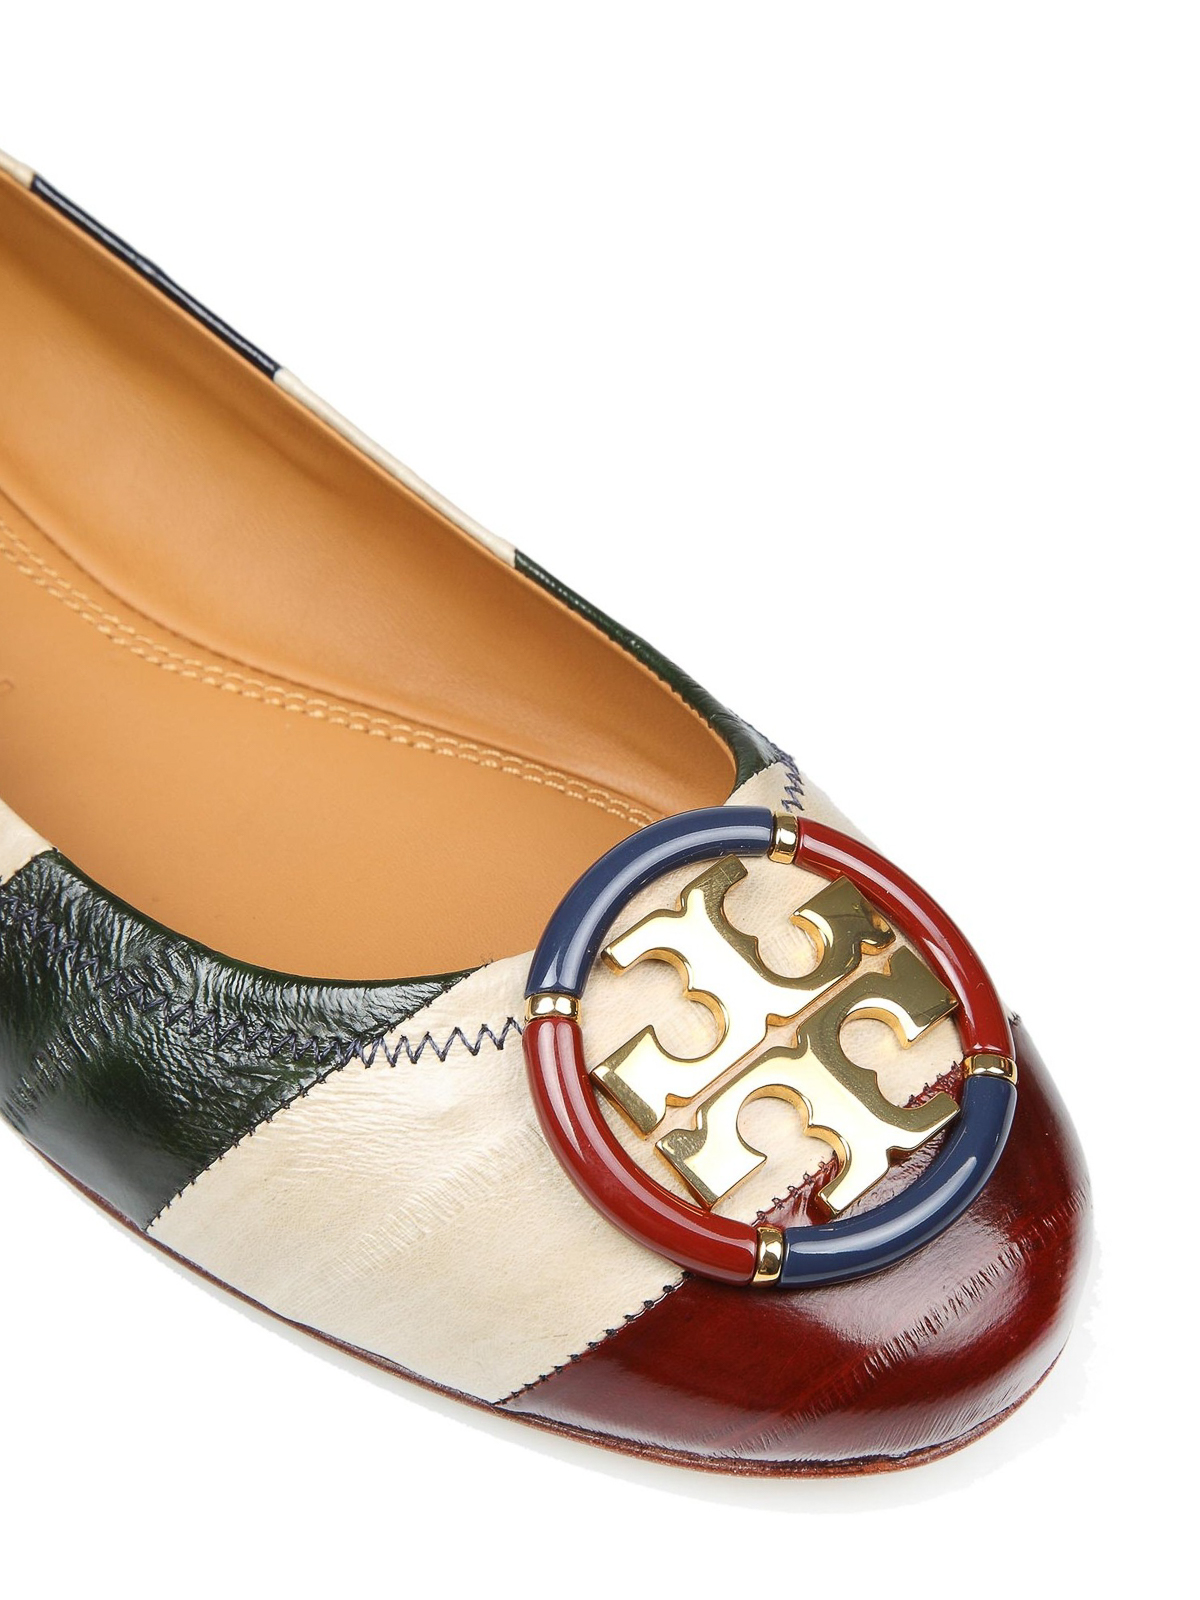 Flat shoes Tory Burch - Minnie leather ballerinas - 74103421 